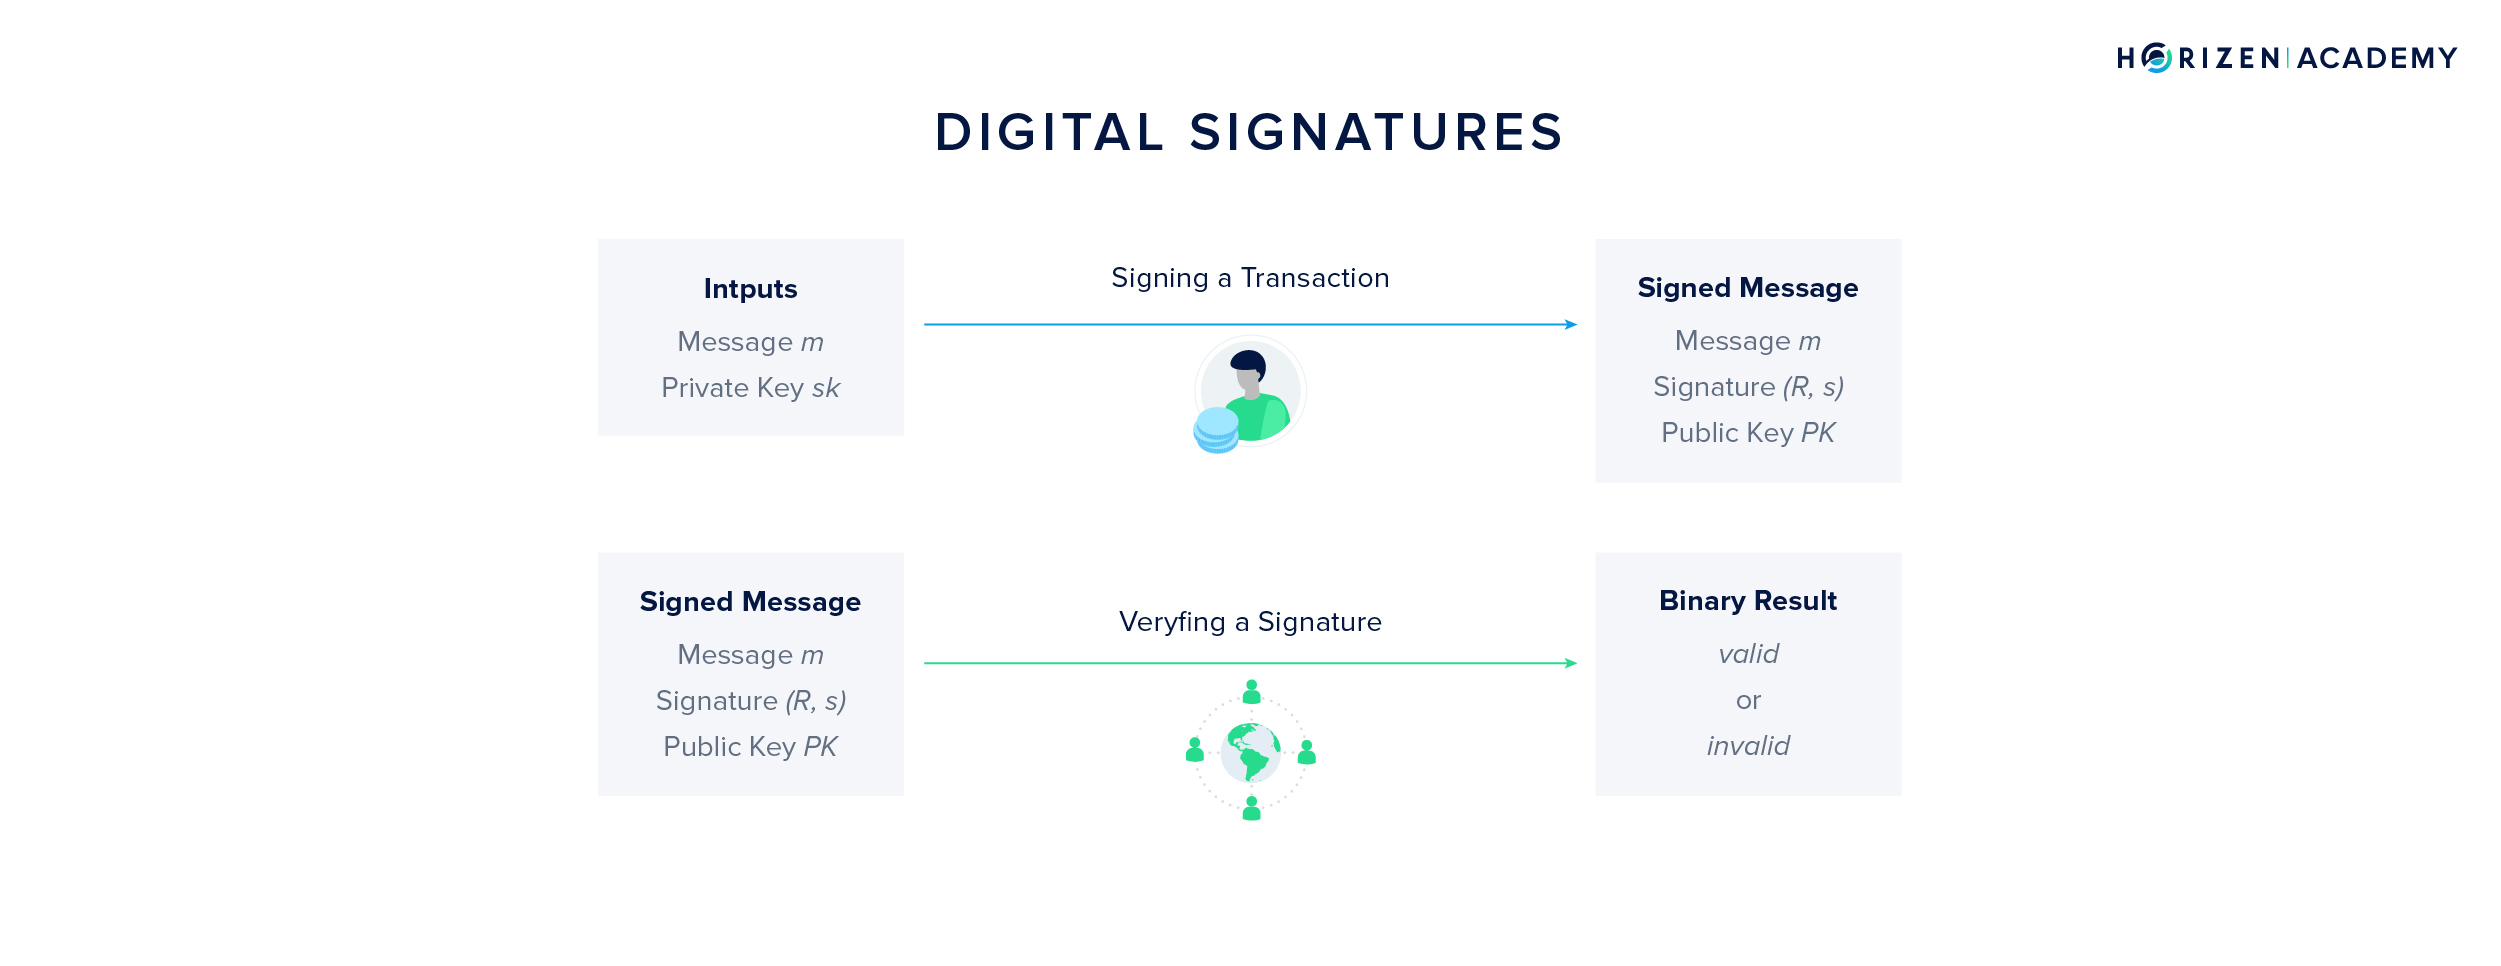 Creating a Digital Signature and Verifying It